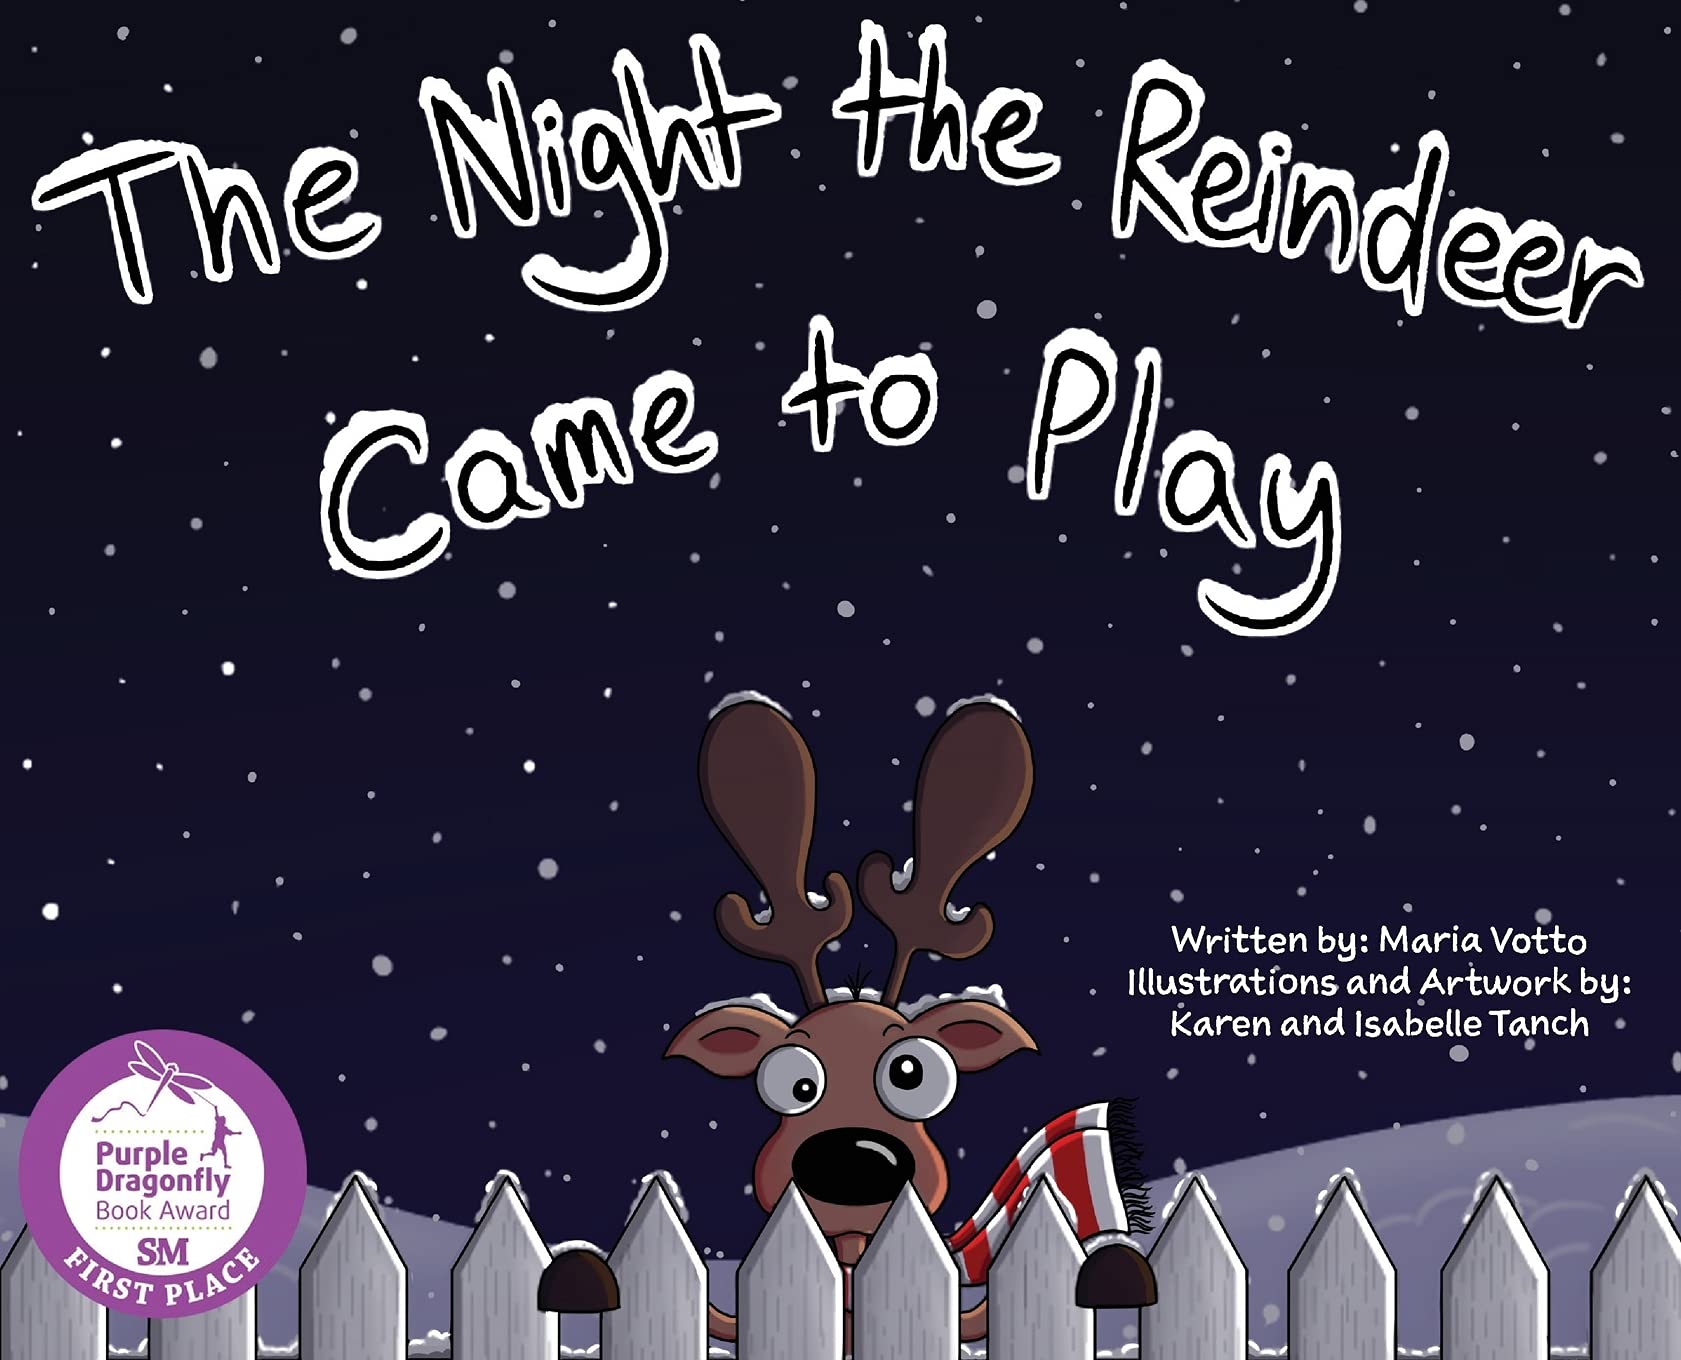 Delightful children’s book "The Night the Reindeer Came to Play" by Maria Votto is now available, a holiday-themed tale of merriment that teaches kids to count